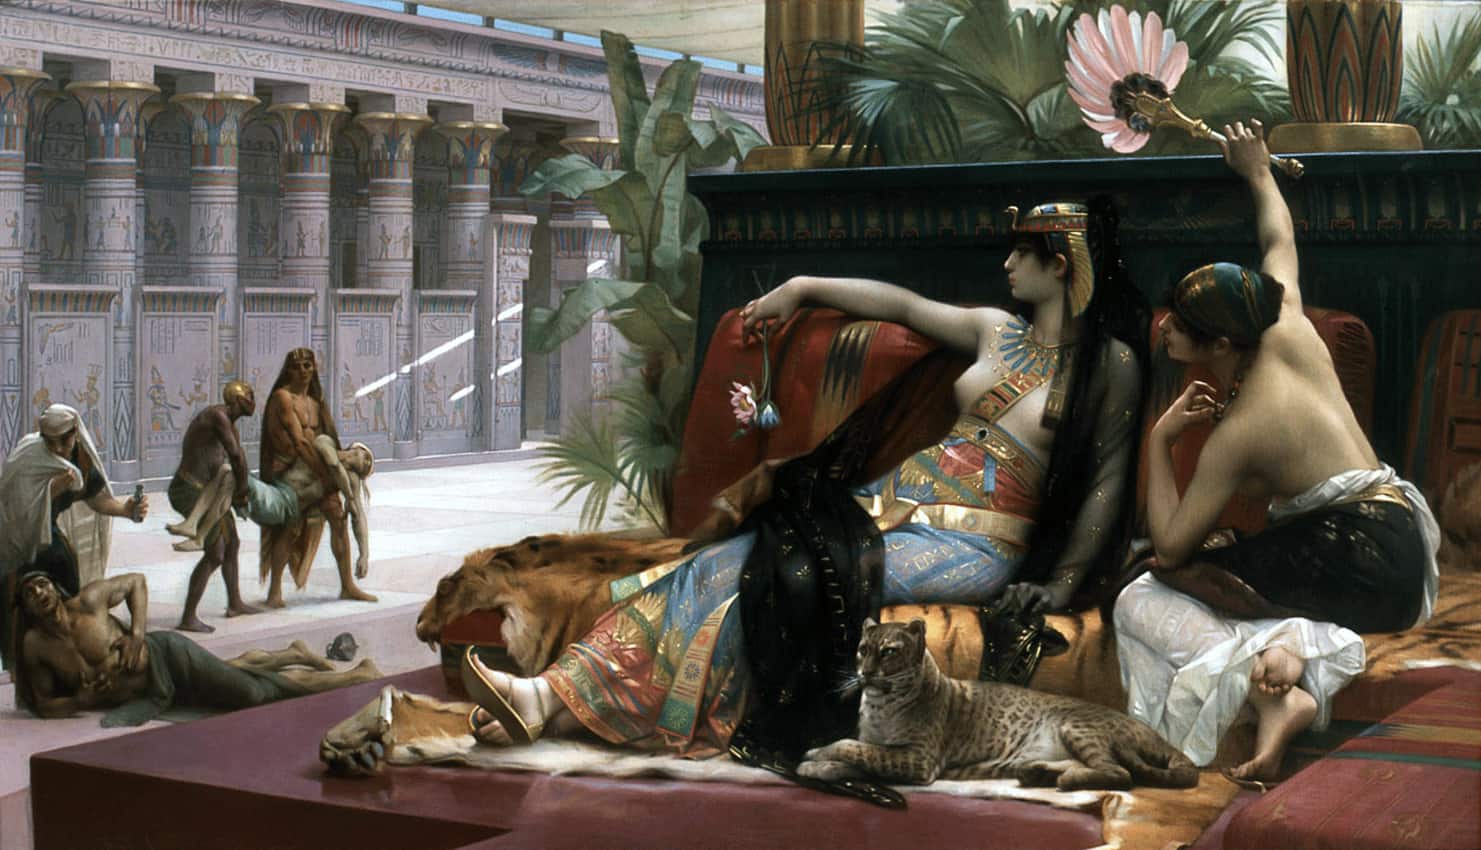 40cleopatra-testing-poisons-on-condemned-prisoners-by-alexandre-cabanel-1887.-wikimedia.jpg